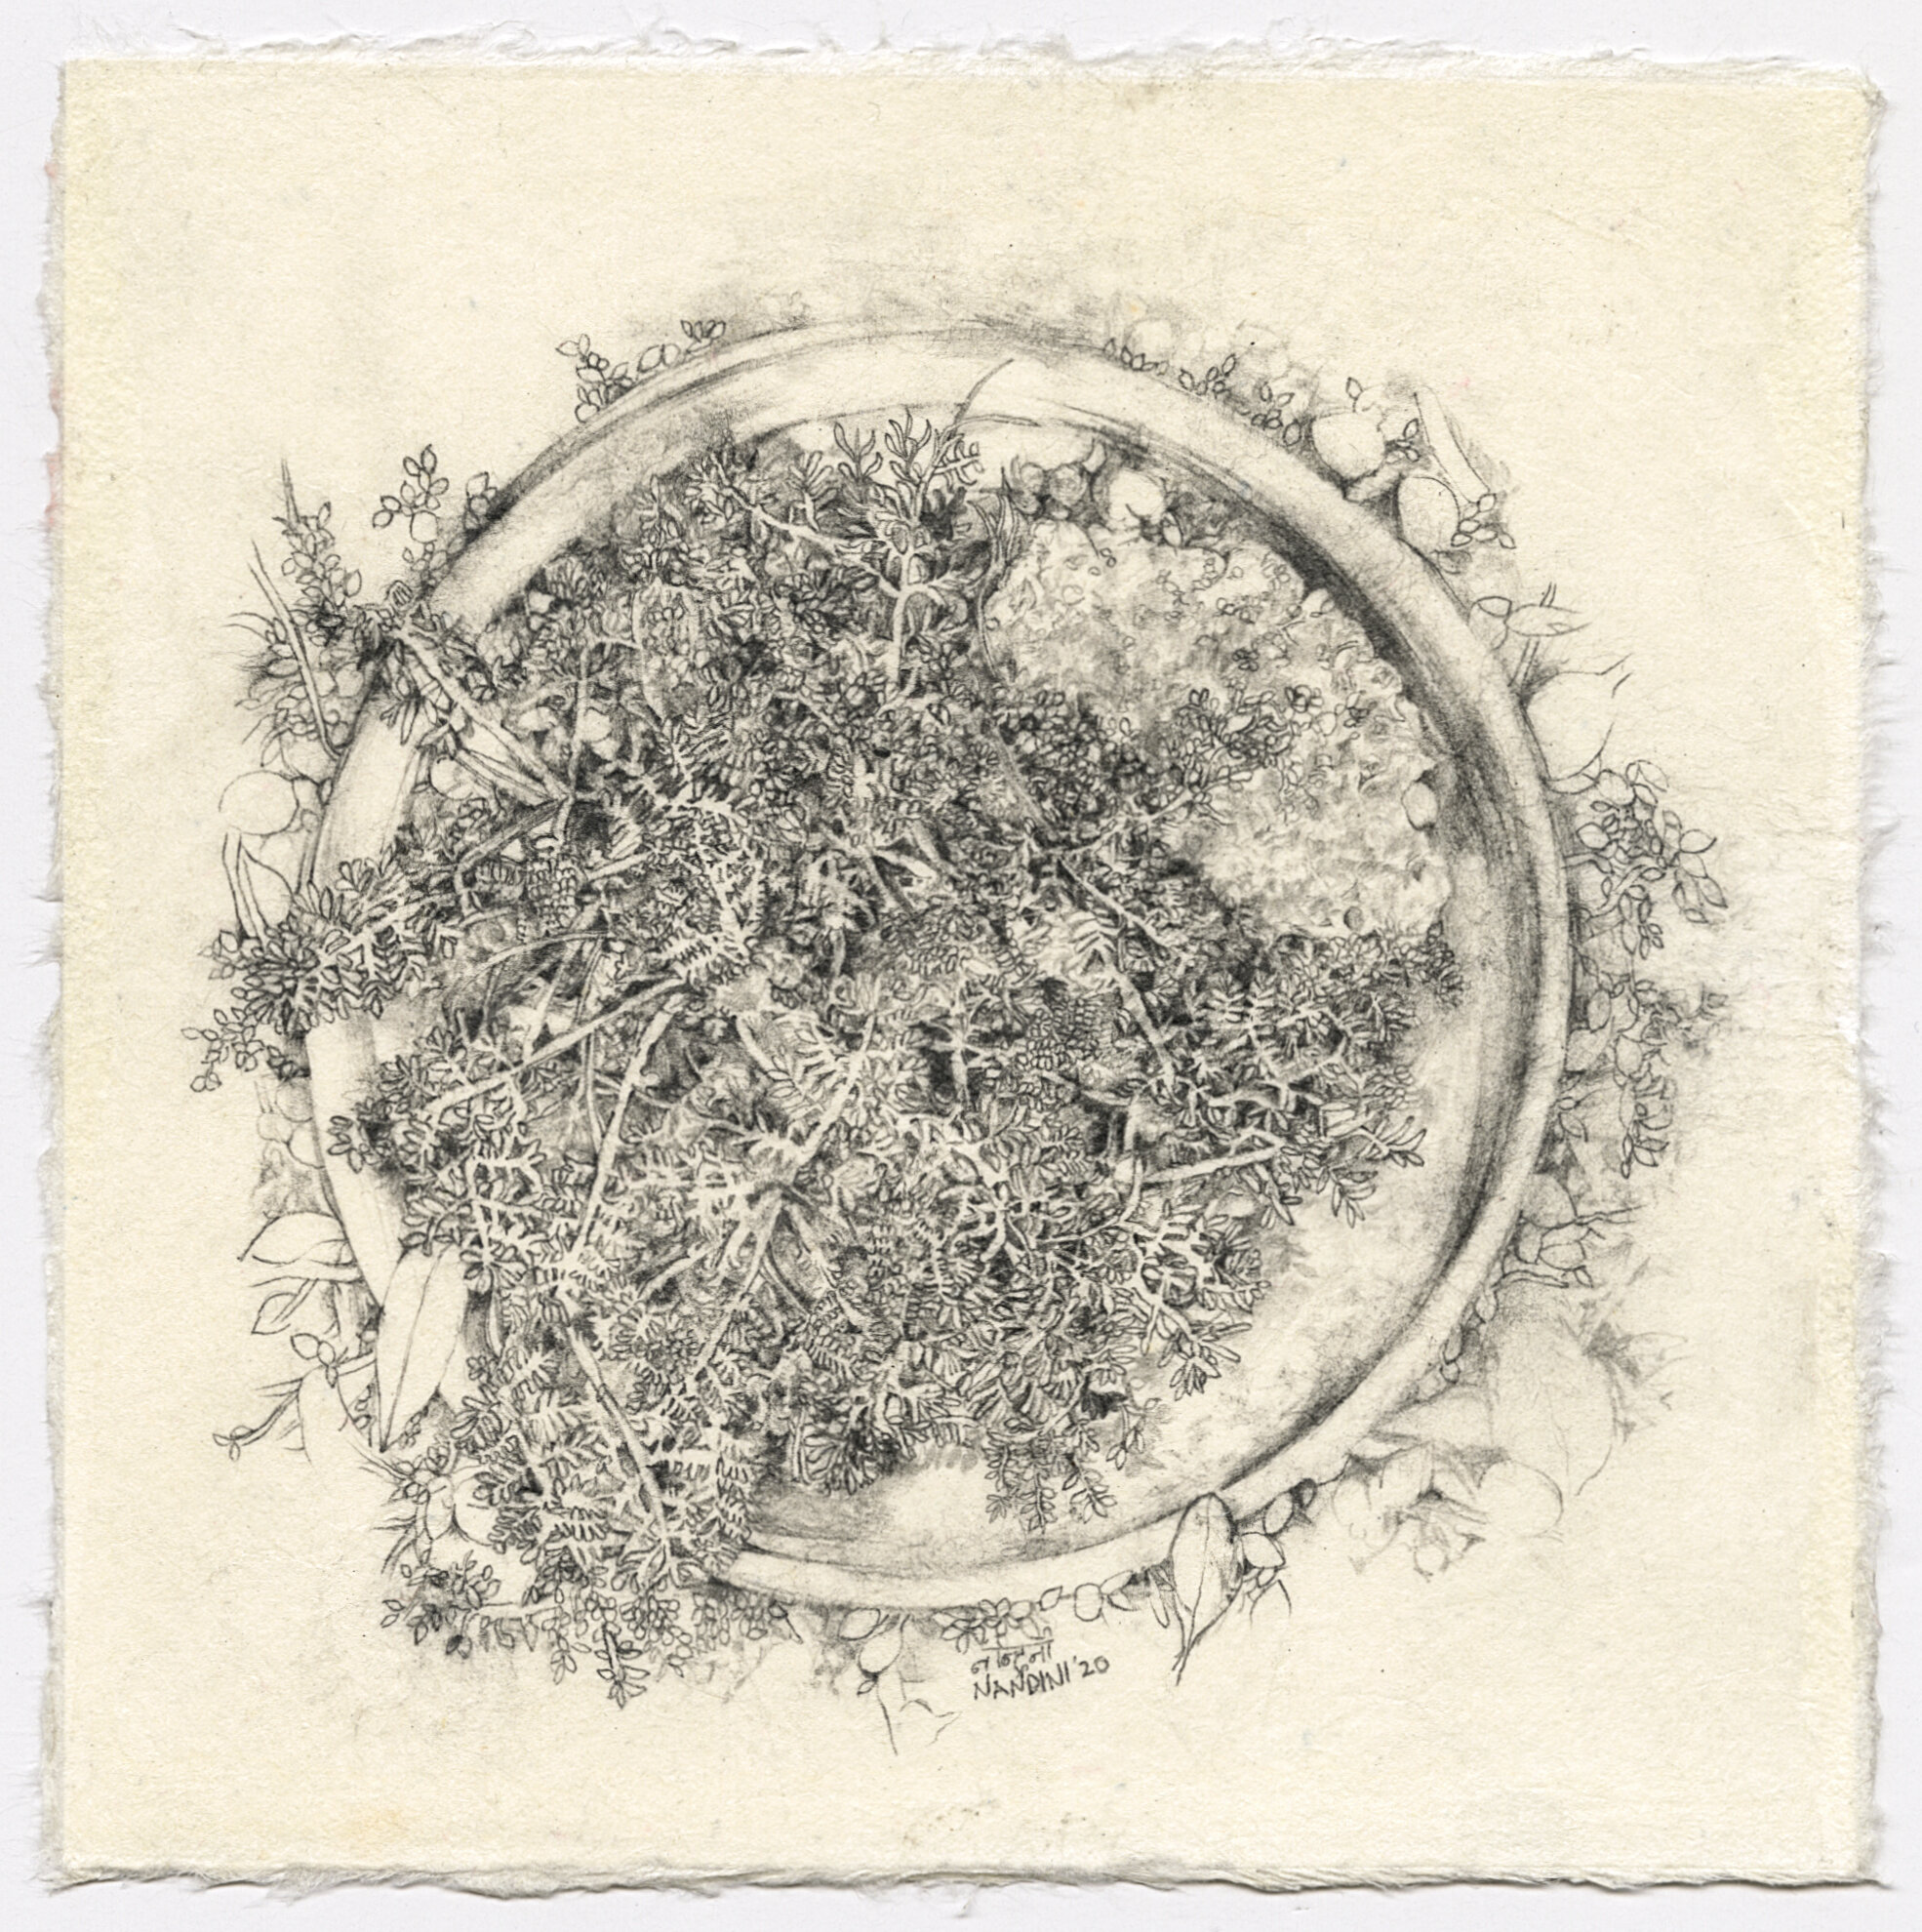  Nandini Chirimar  Greenhouse Diaries,  2020 Pencil on Kaji Natural paper, mounted on Rives  6 1/8 x 6 1/8 inches   